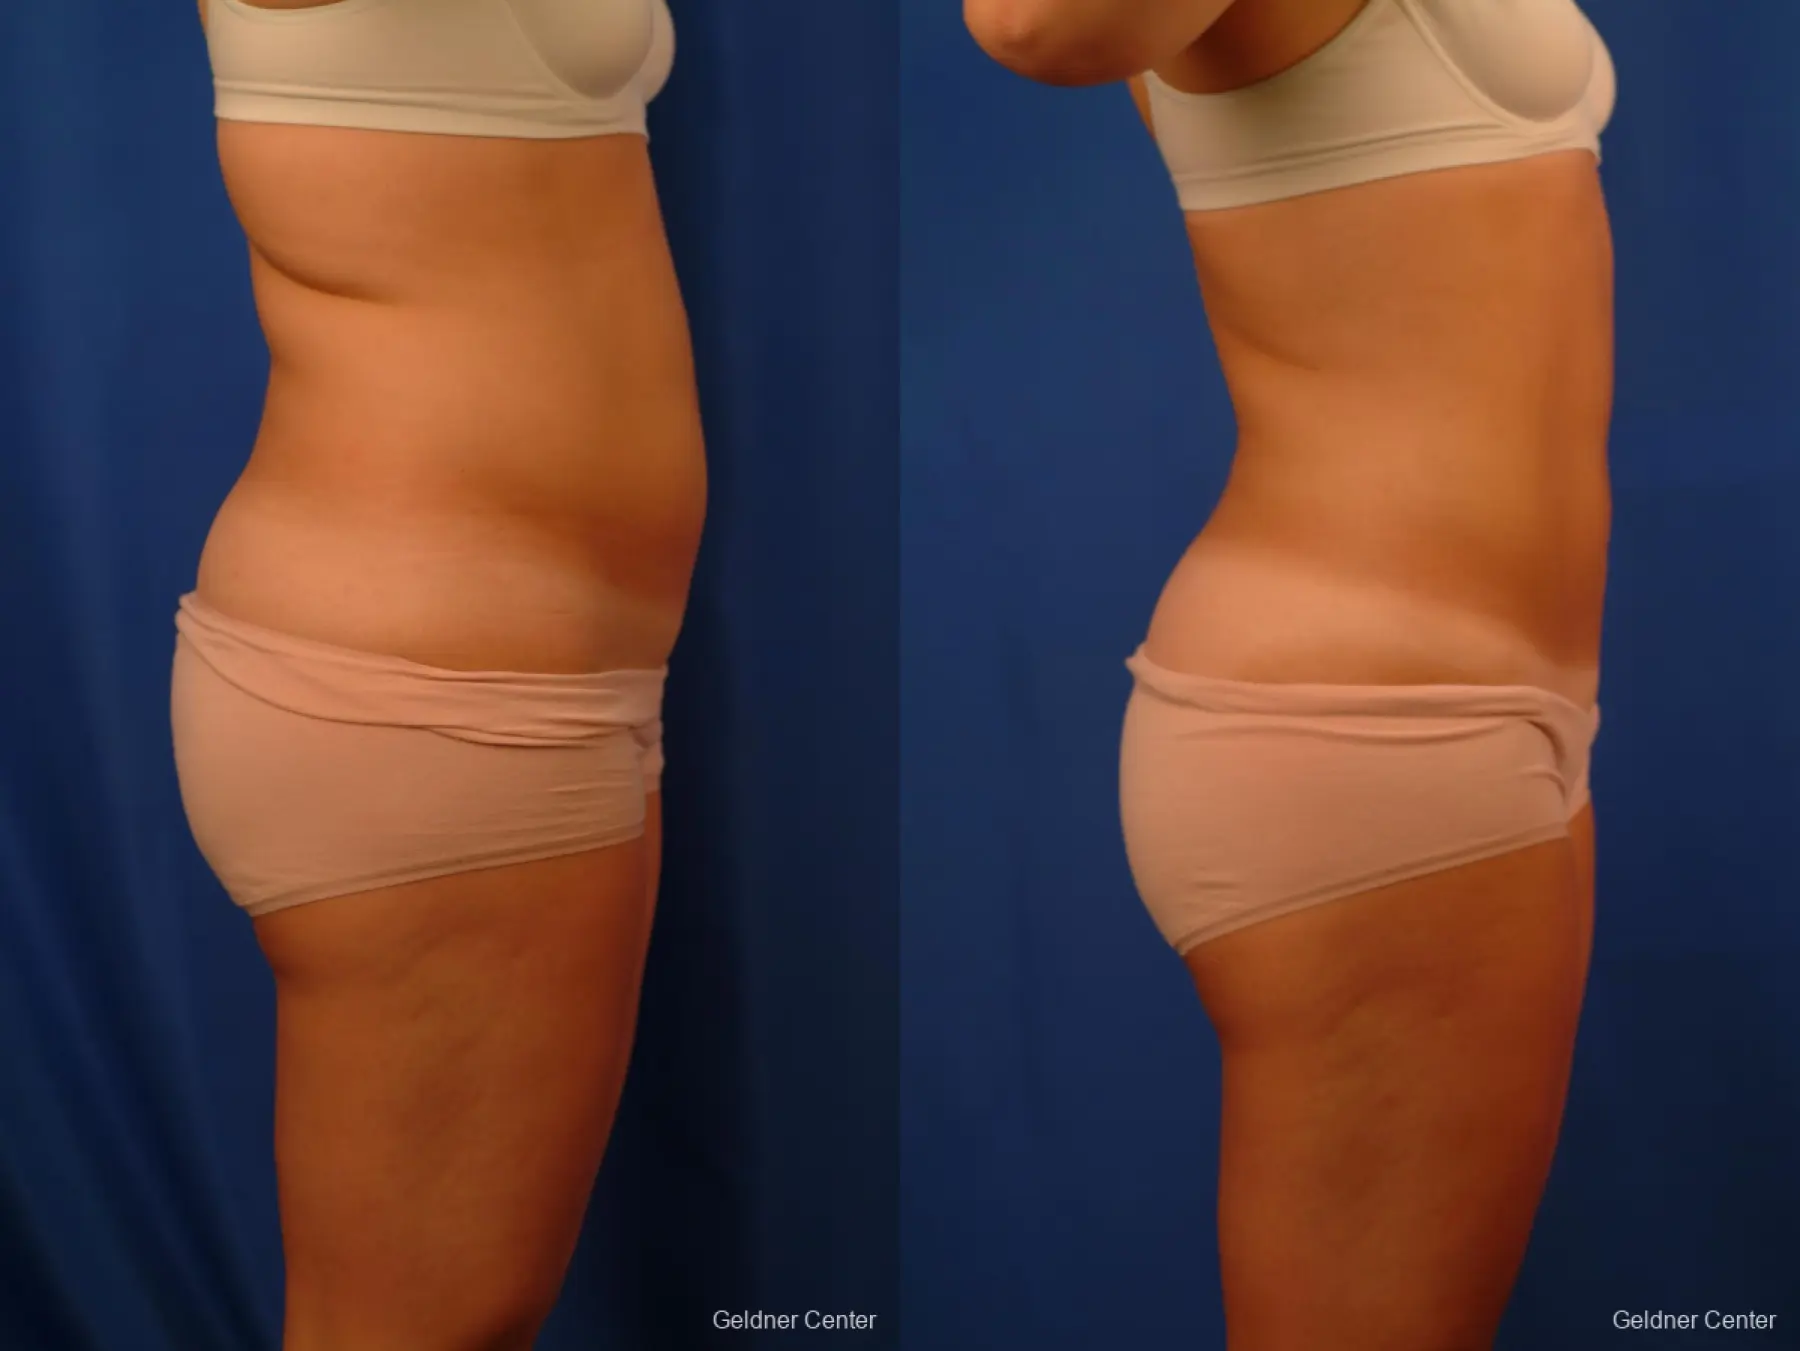 Liposuction: Patient 12 - Before and After 3